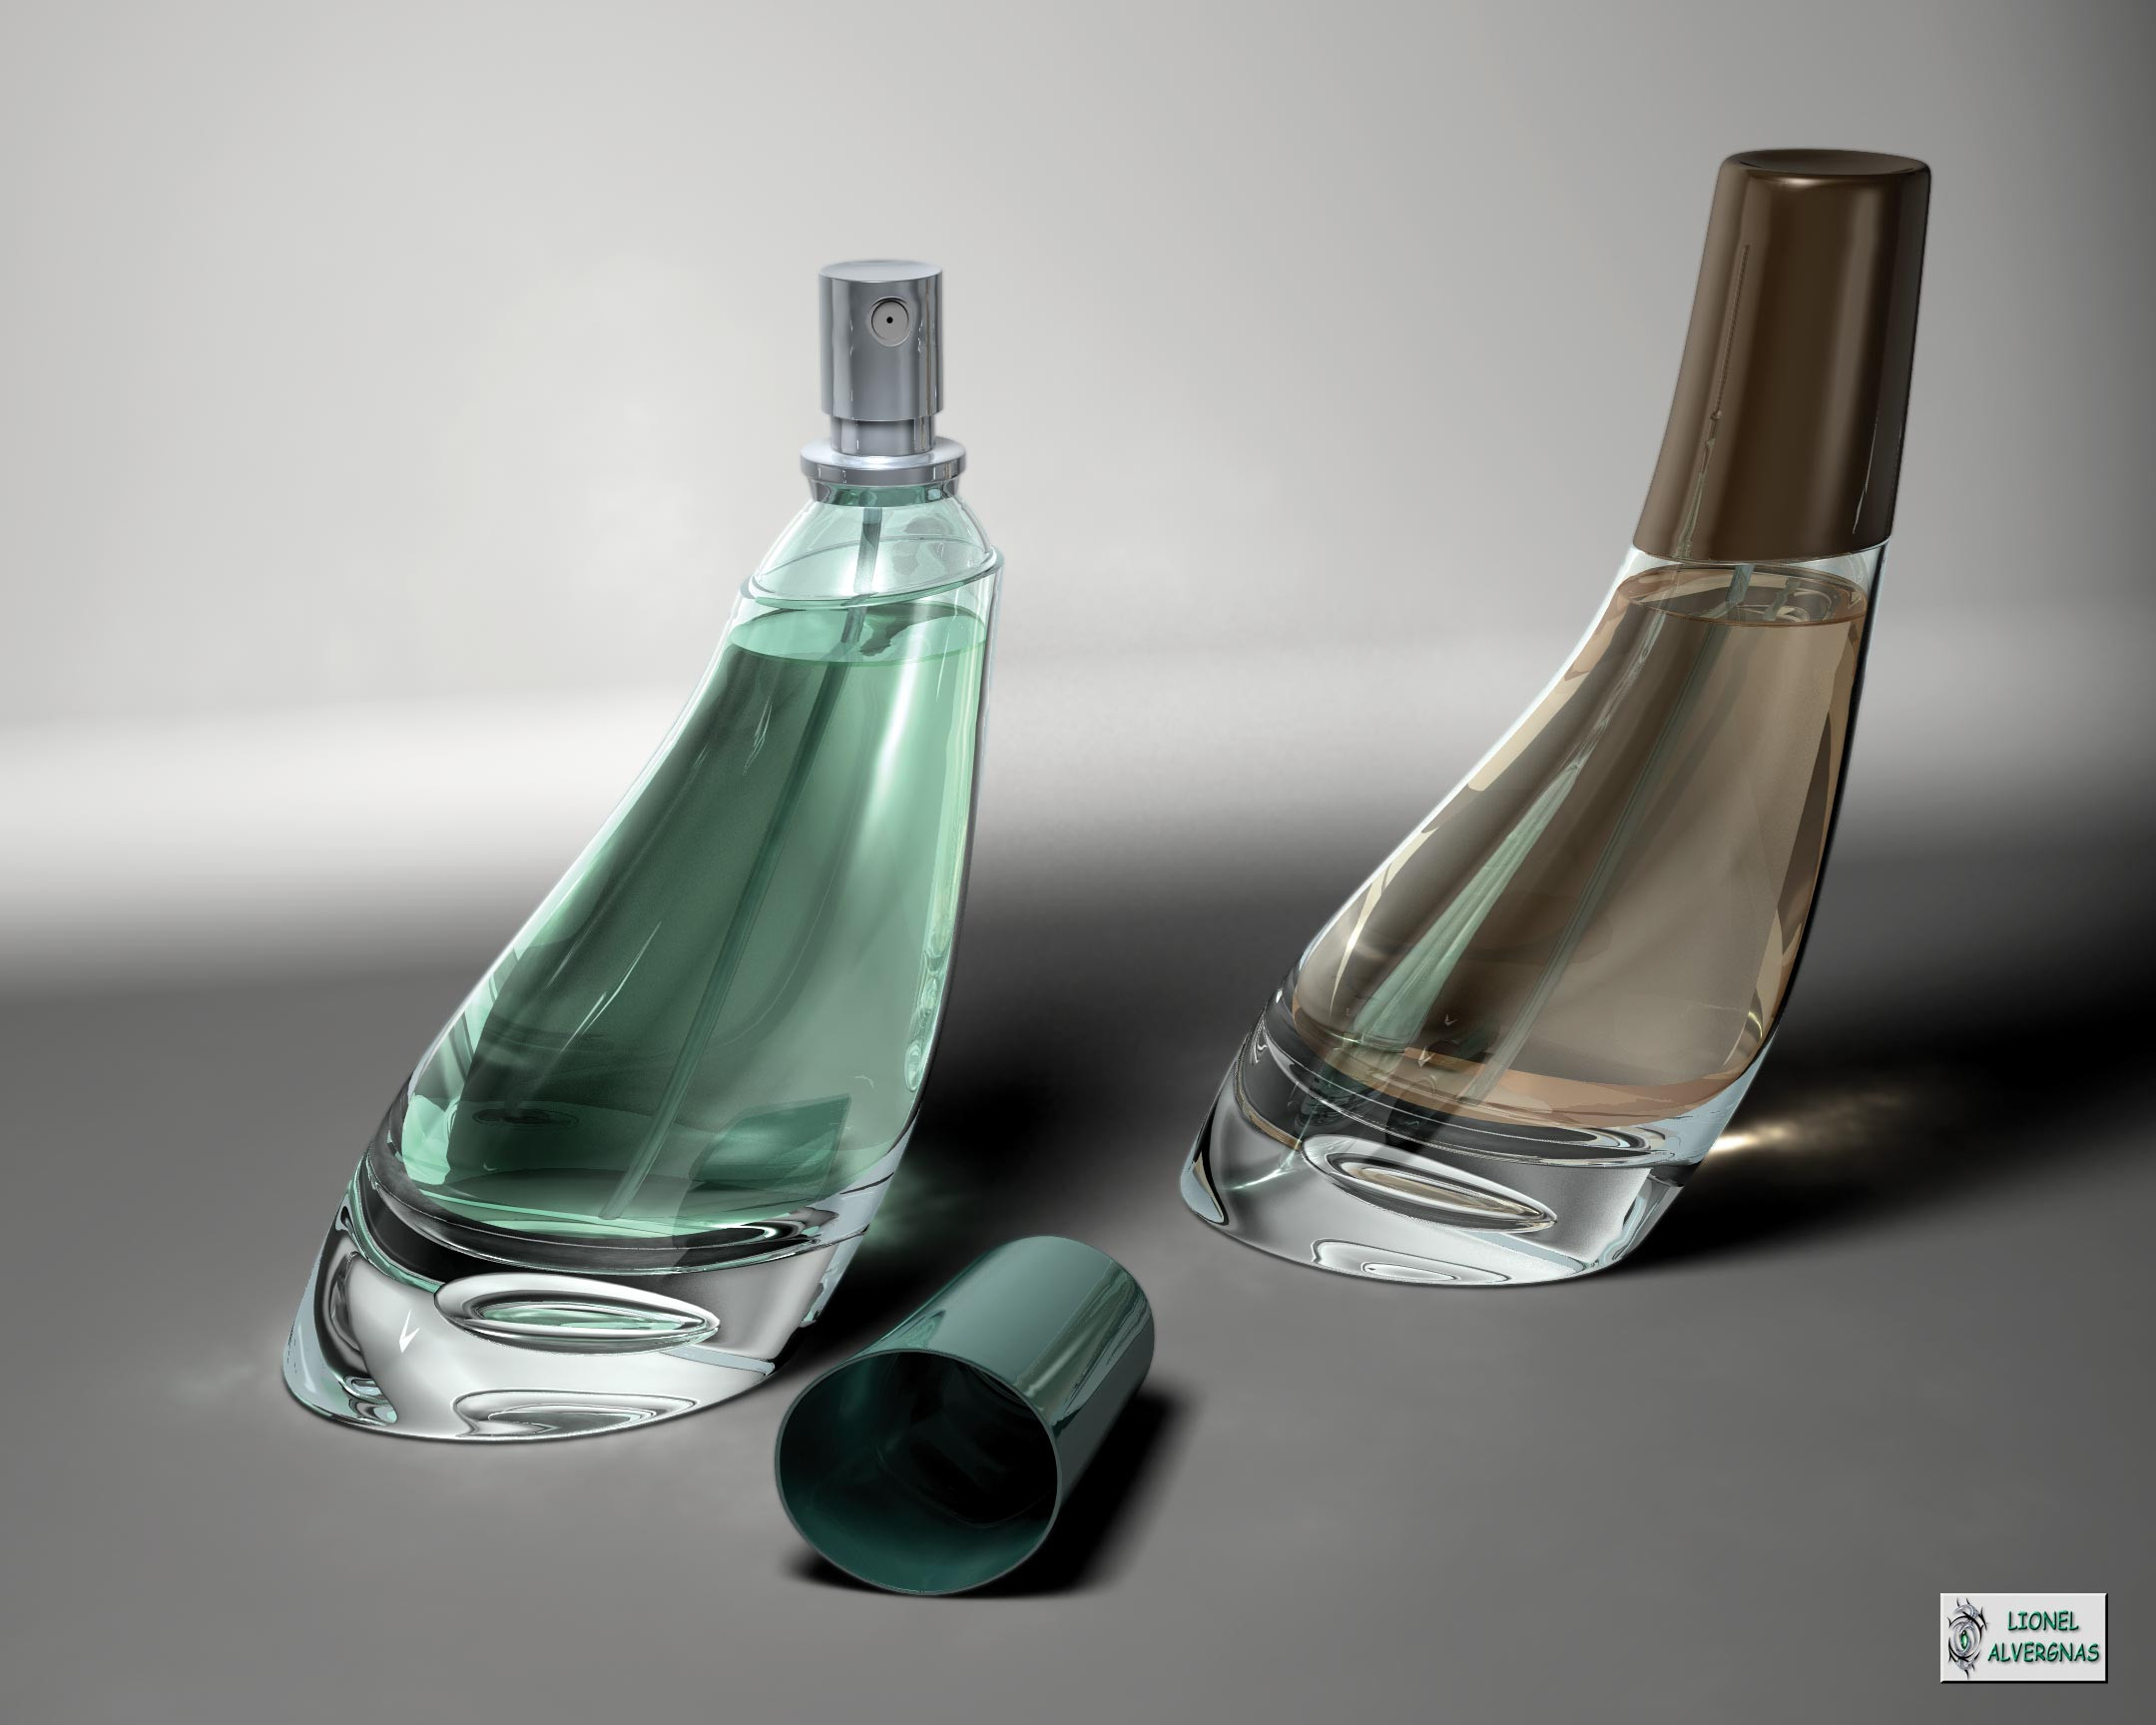 Another bottles of perfume in 3D...